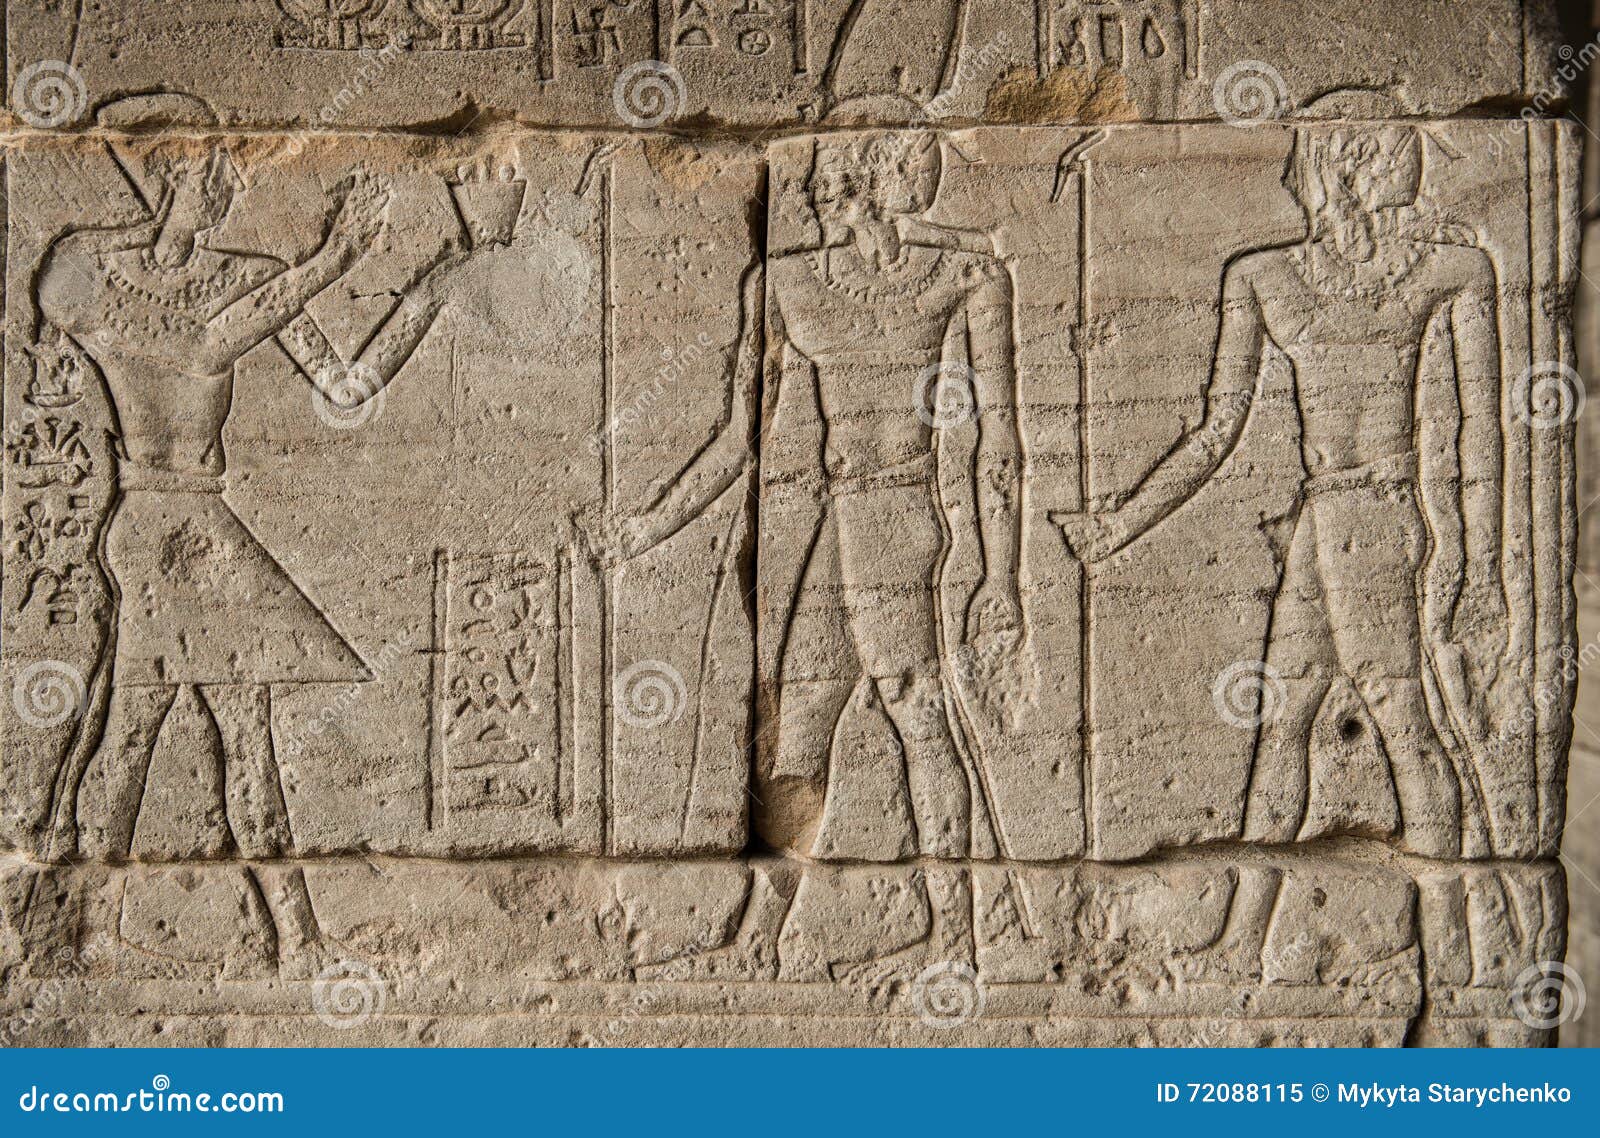 the image of pharaohs and warriors on walls of the egyptian